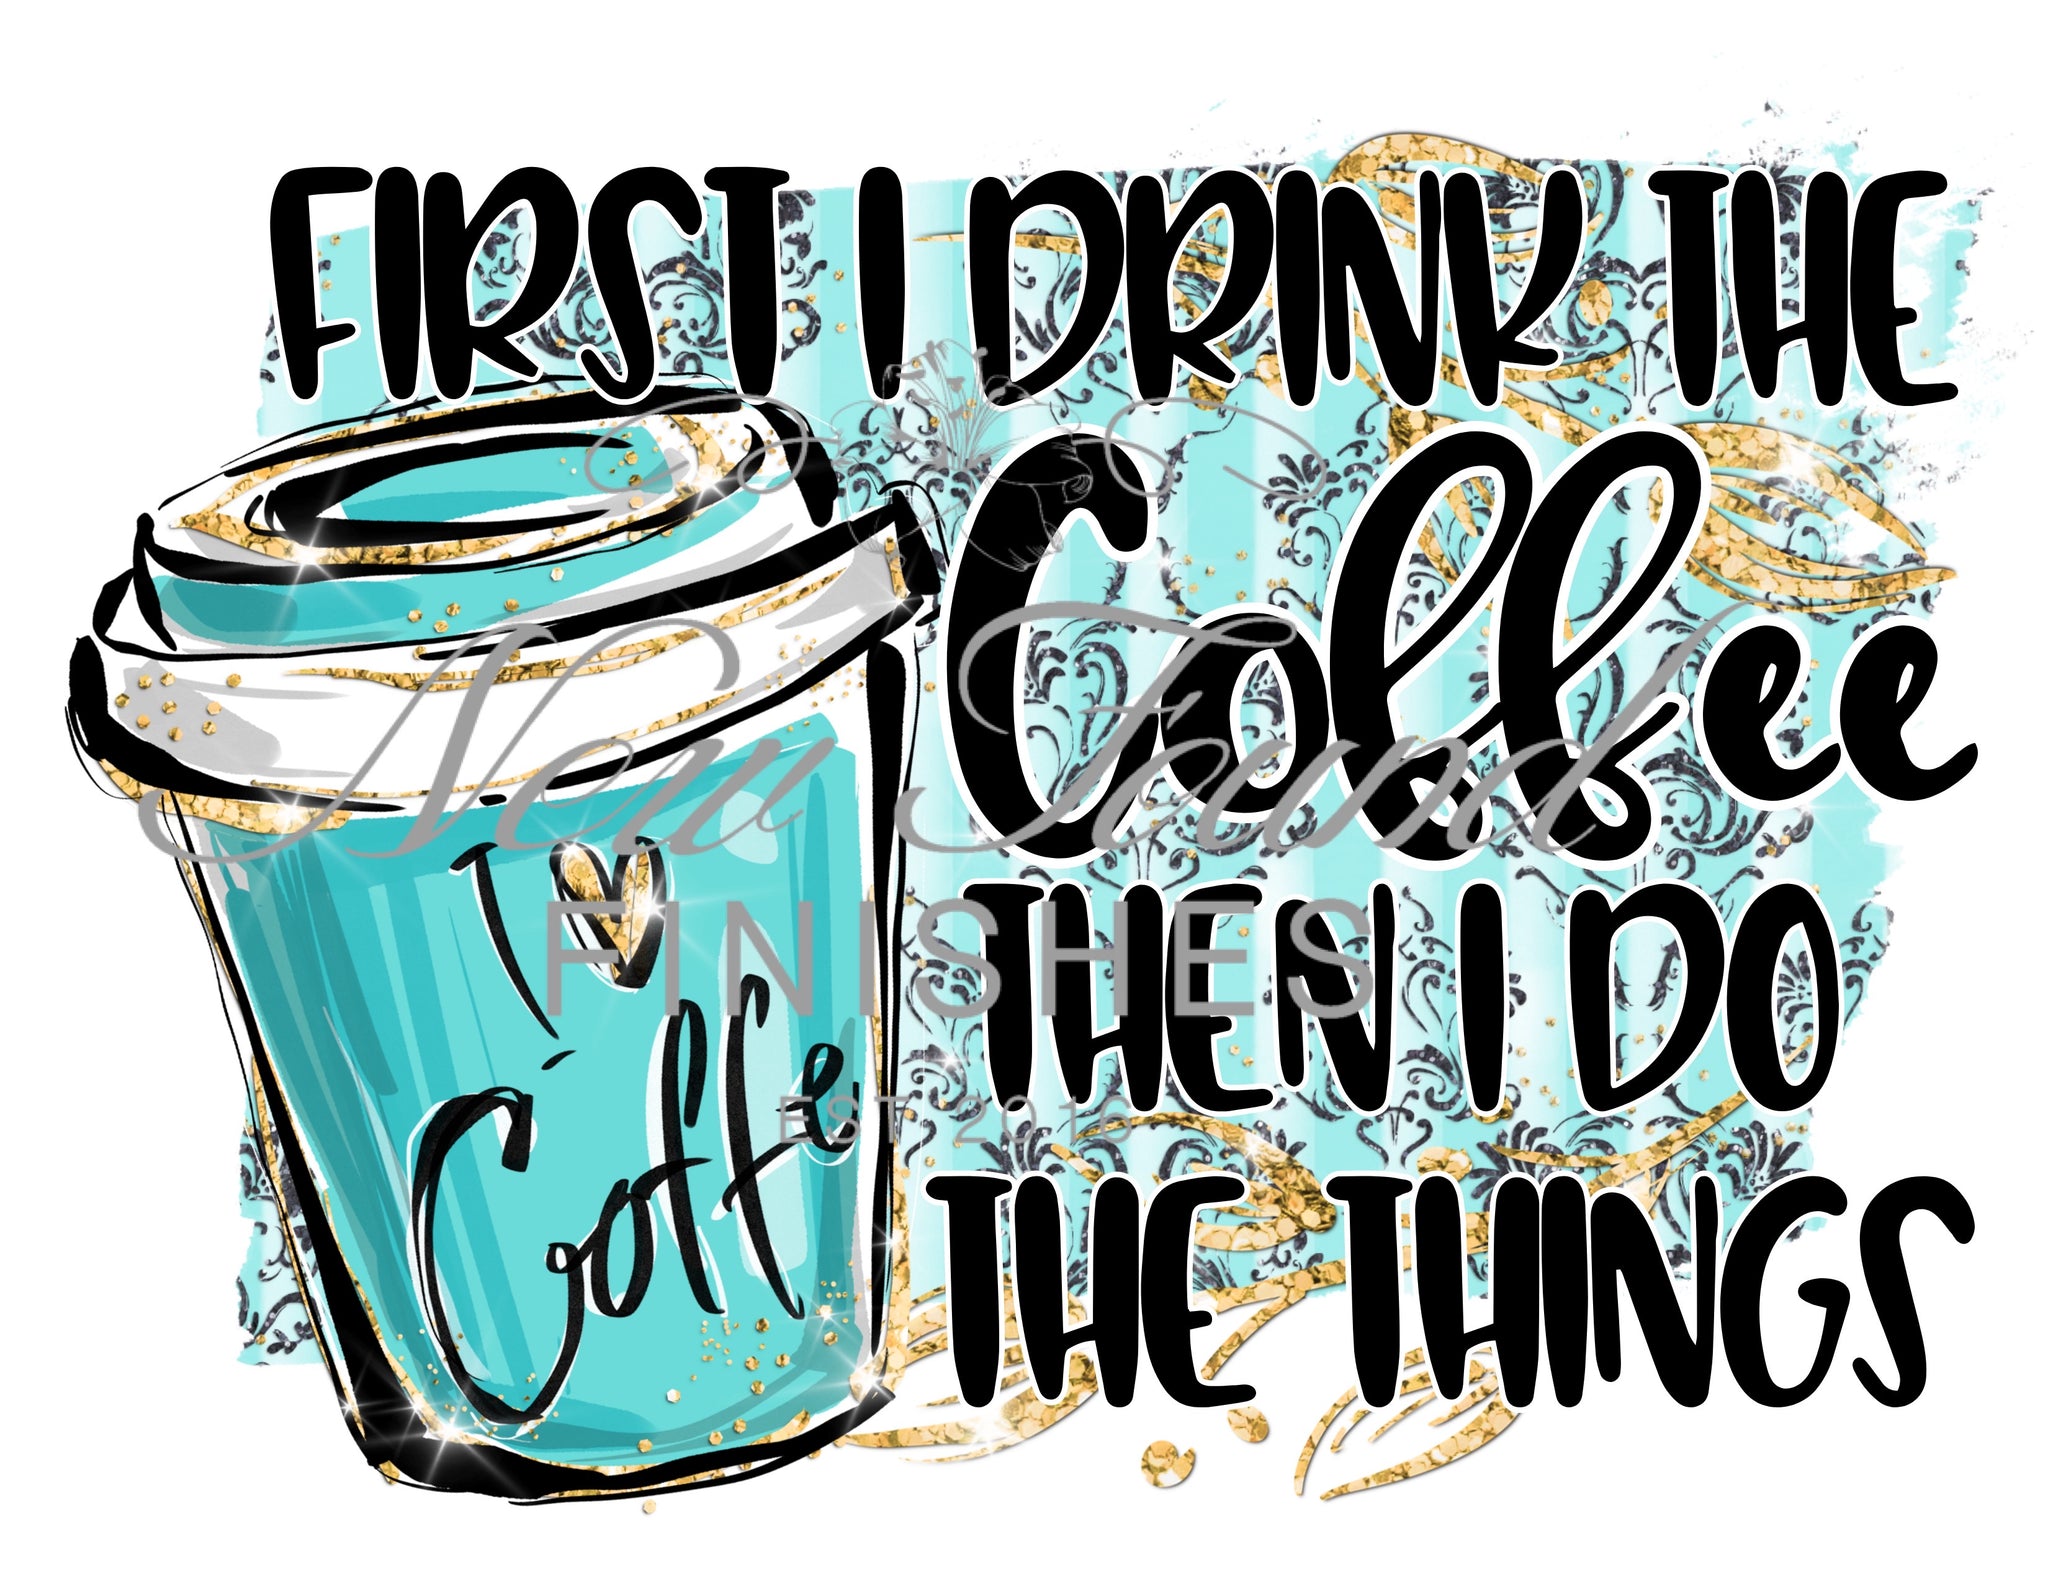 First I drink the coffee